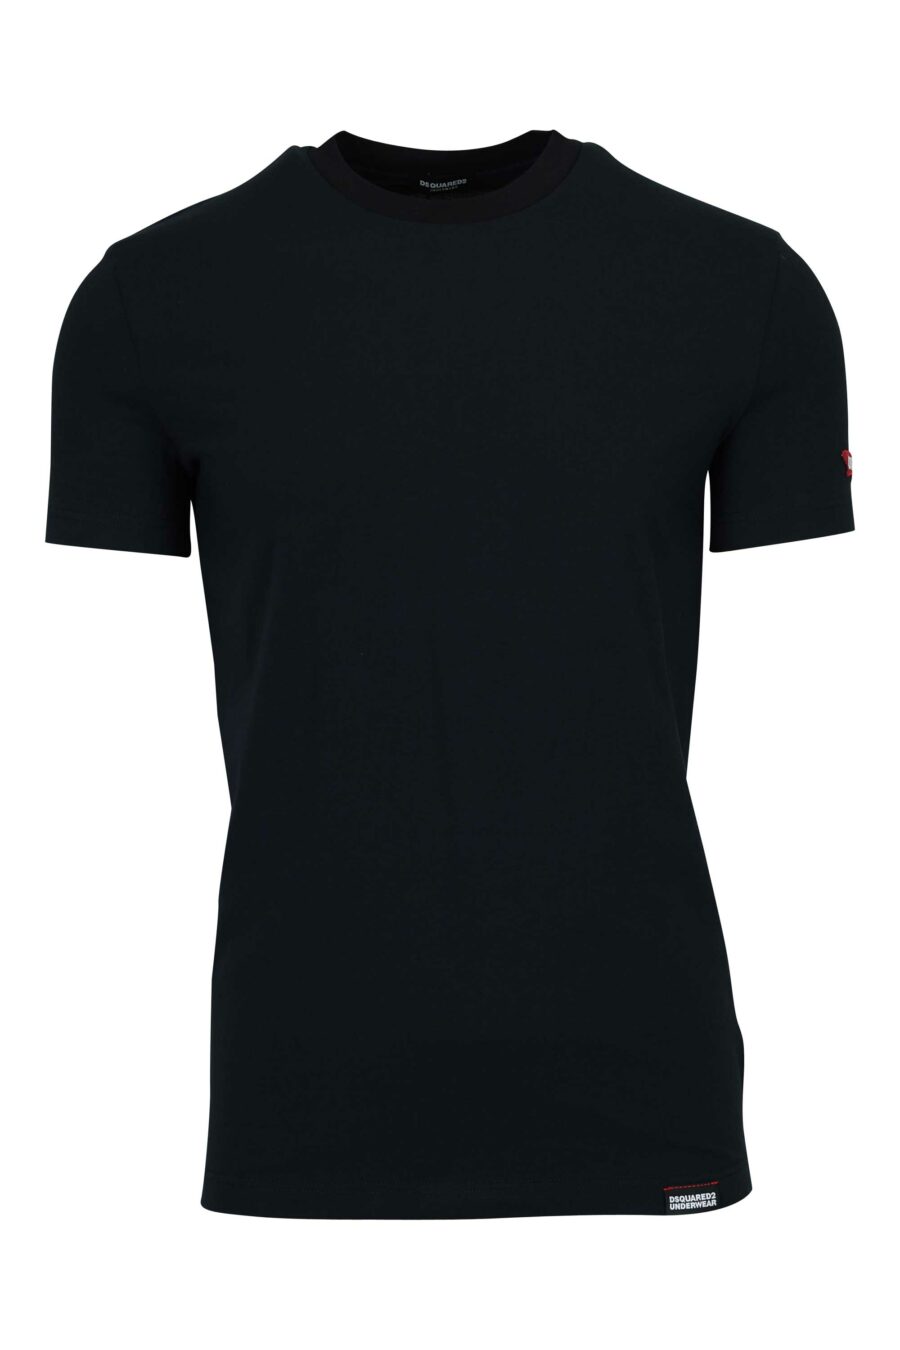 Black T-shirt with logo label - 8032674811202